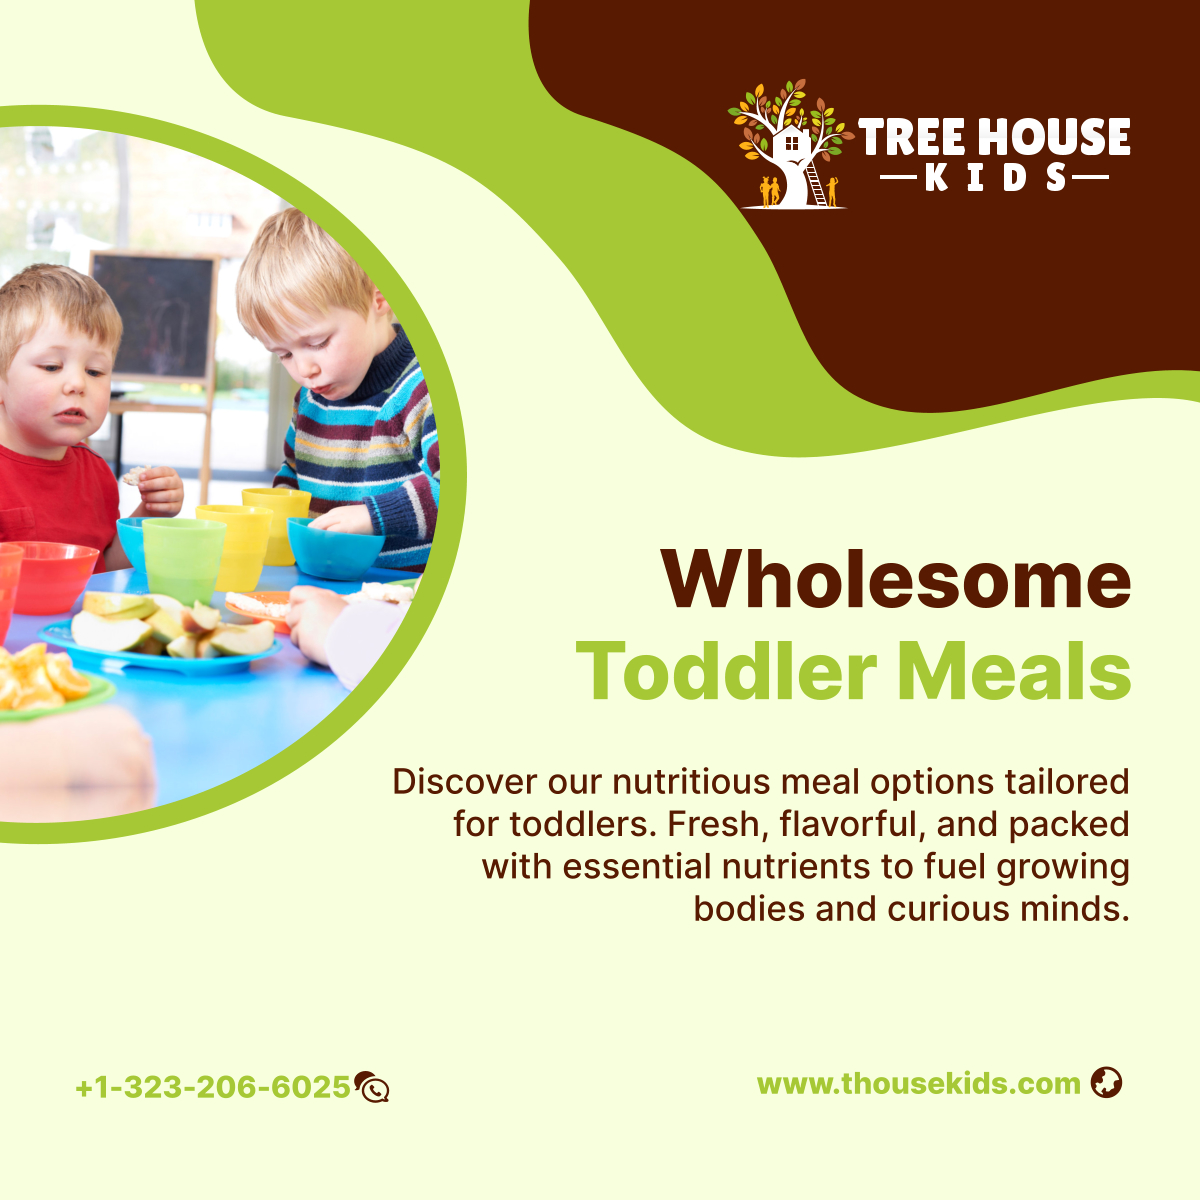 Nourish your little one with our tasty and nutritious meals! Fuel their adventures with wholesome goodness. 

#LosAngelesCA #Childcare #ToddlerMeals